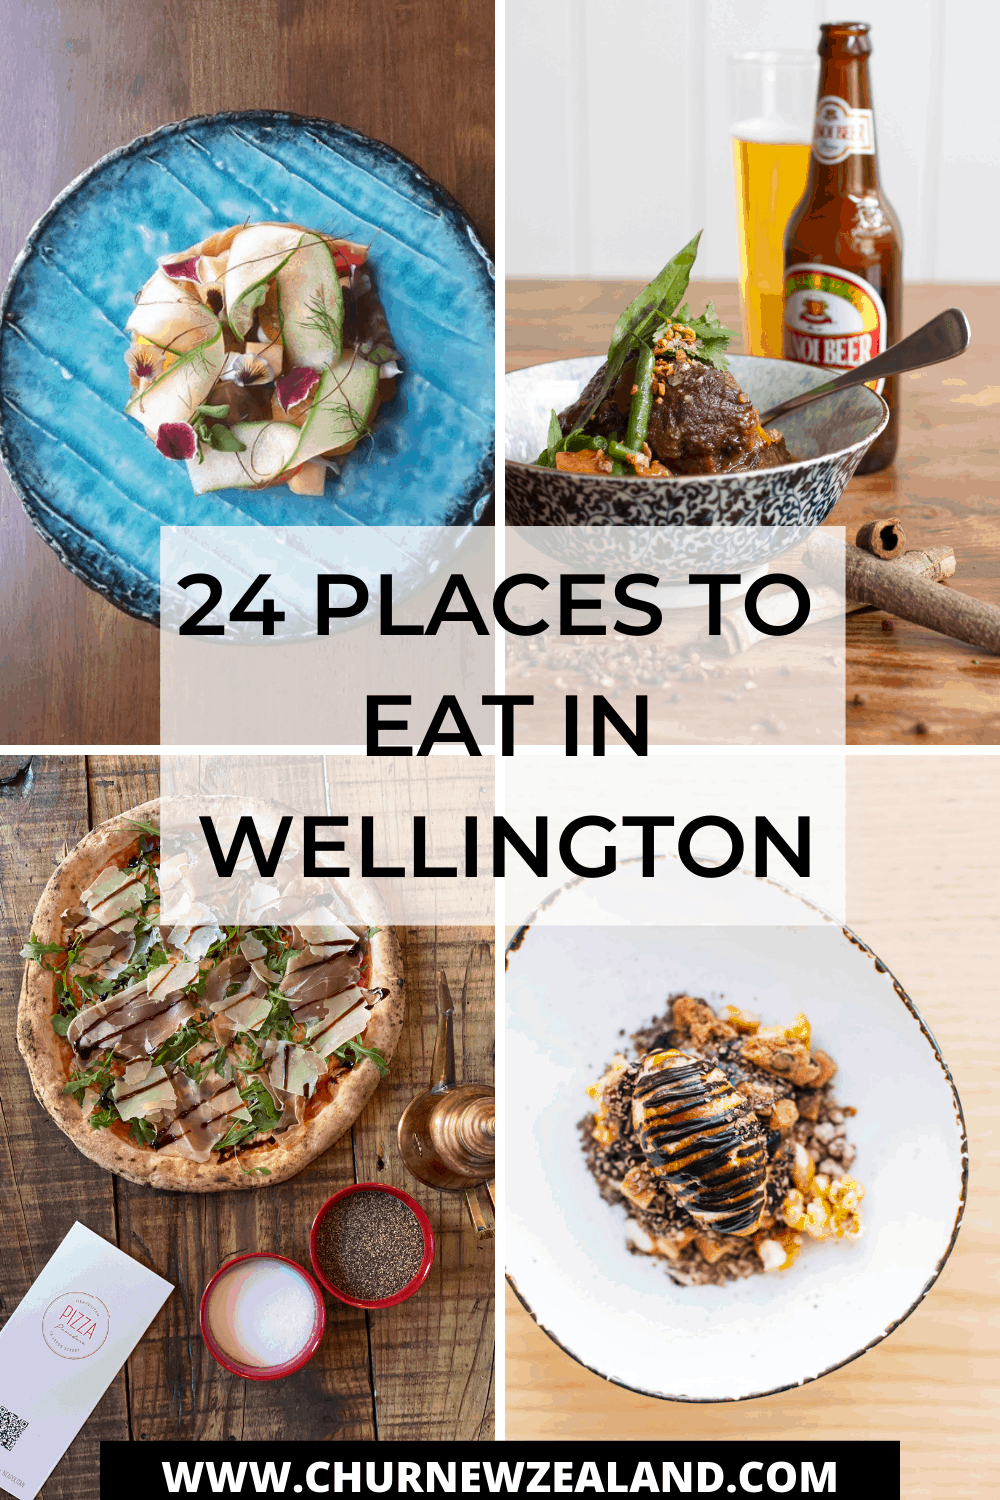 24 PLACES TO EAT IN WELLINGTON | AS PER @WELLINGNOMS